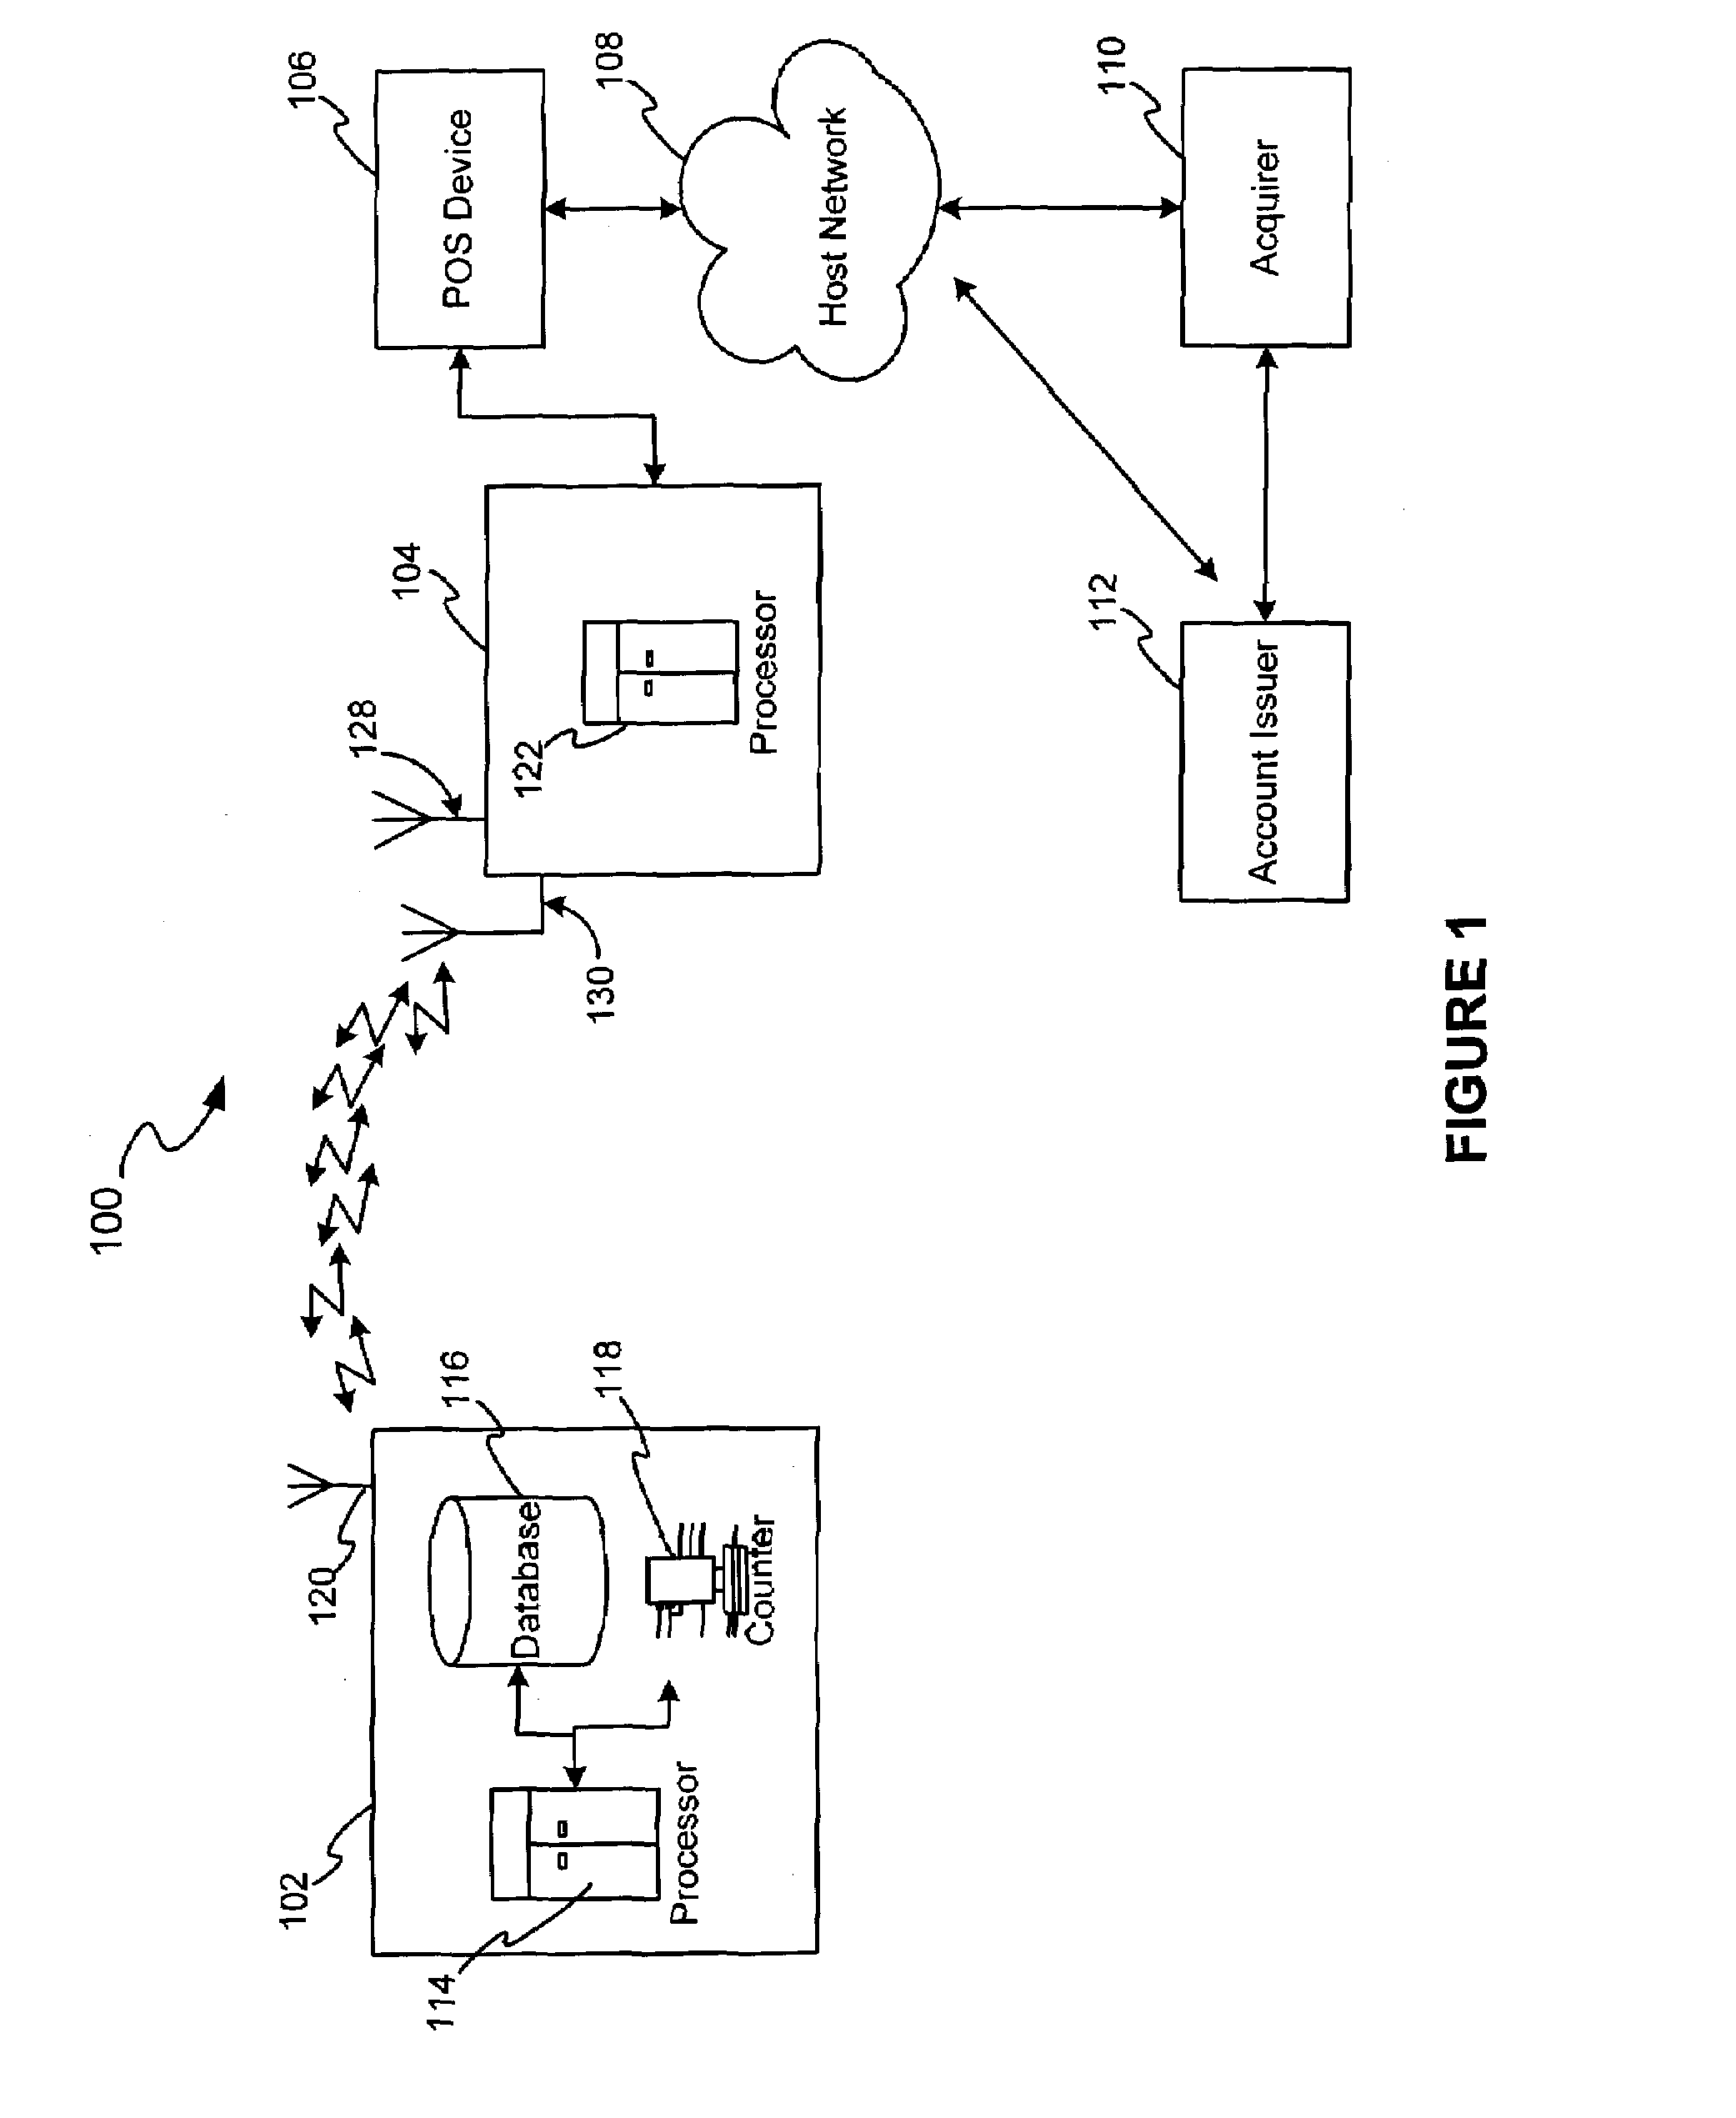 System and method for authenticating a RF transaction using a transaction account routing number